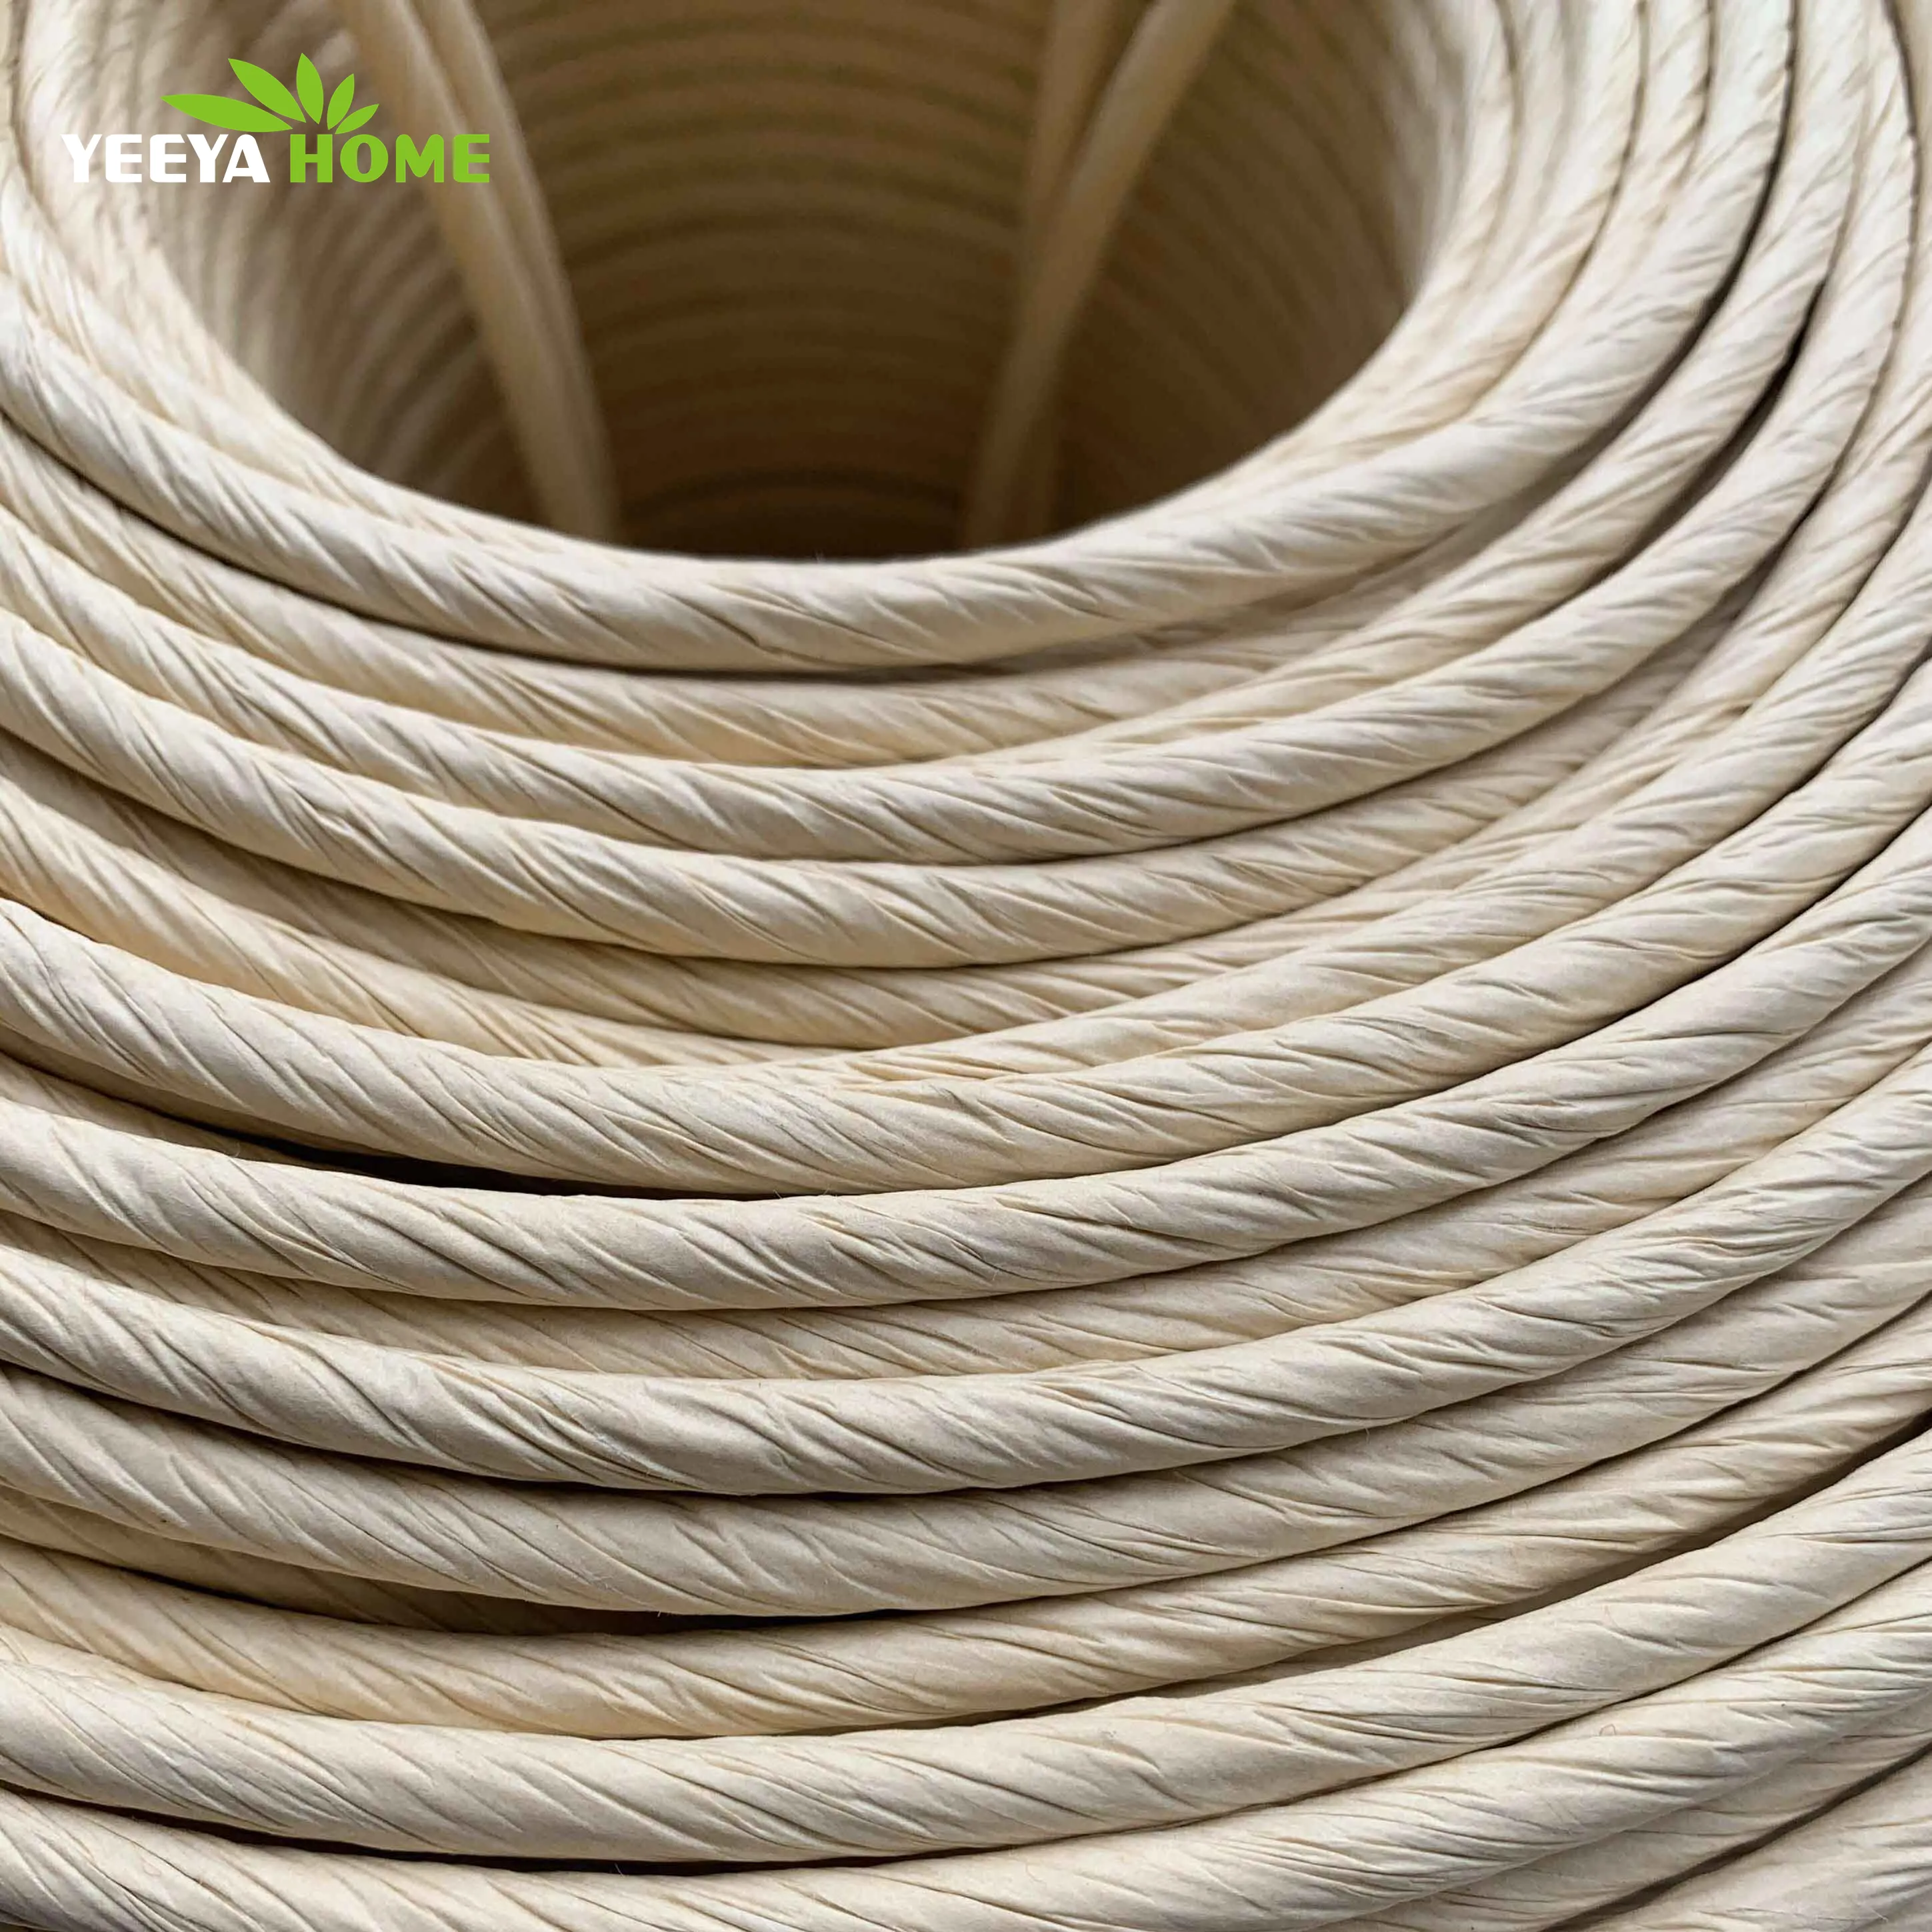 Soft and Smooth Rush Chair Material Raw Natural Danish Paper Cord for Chairs